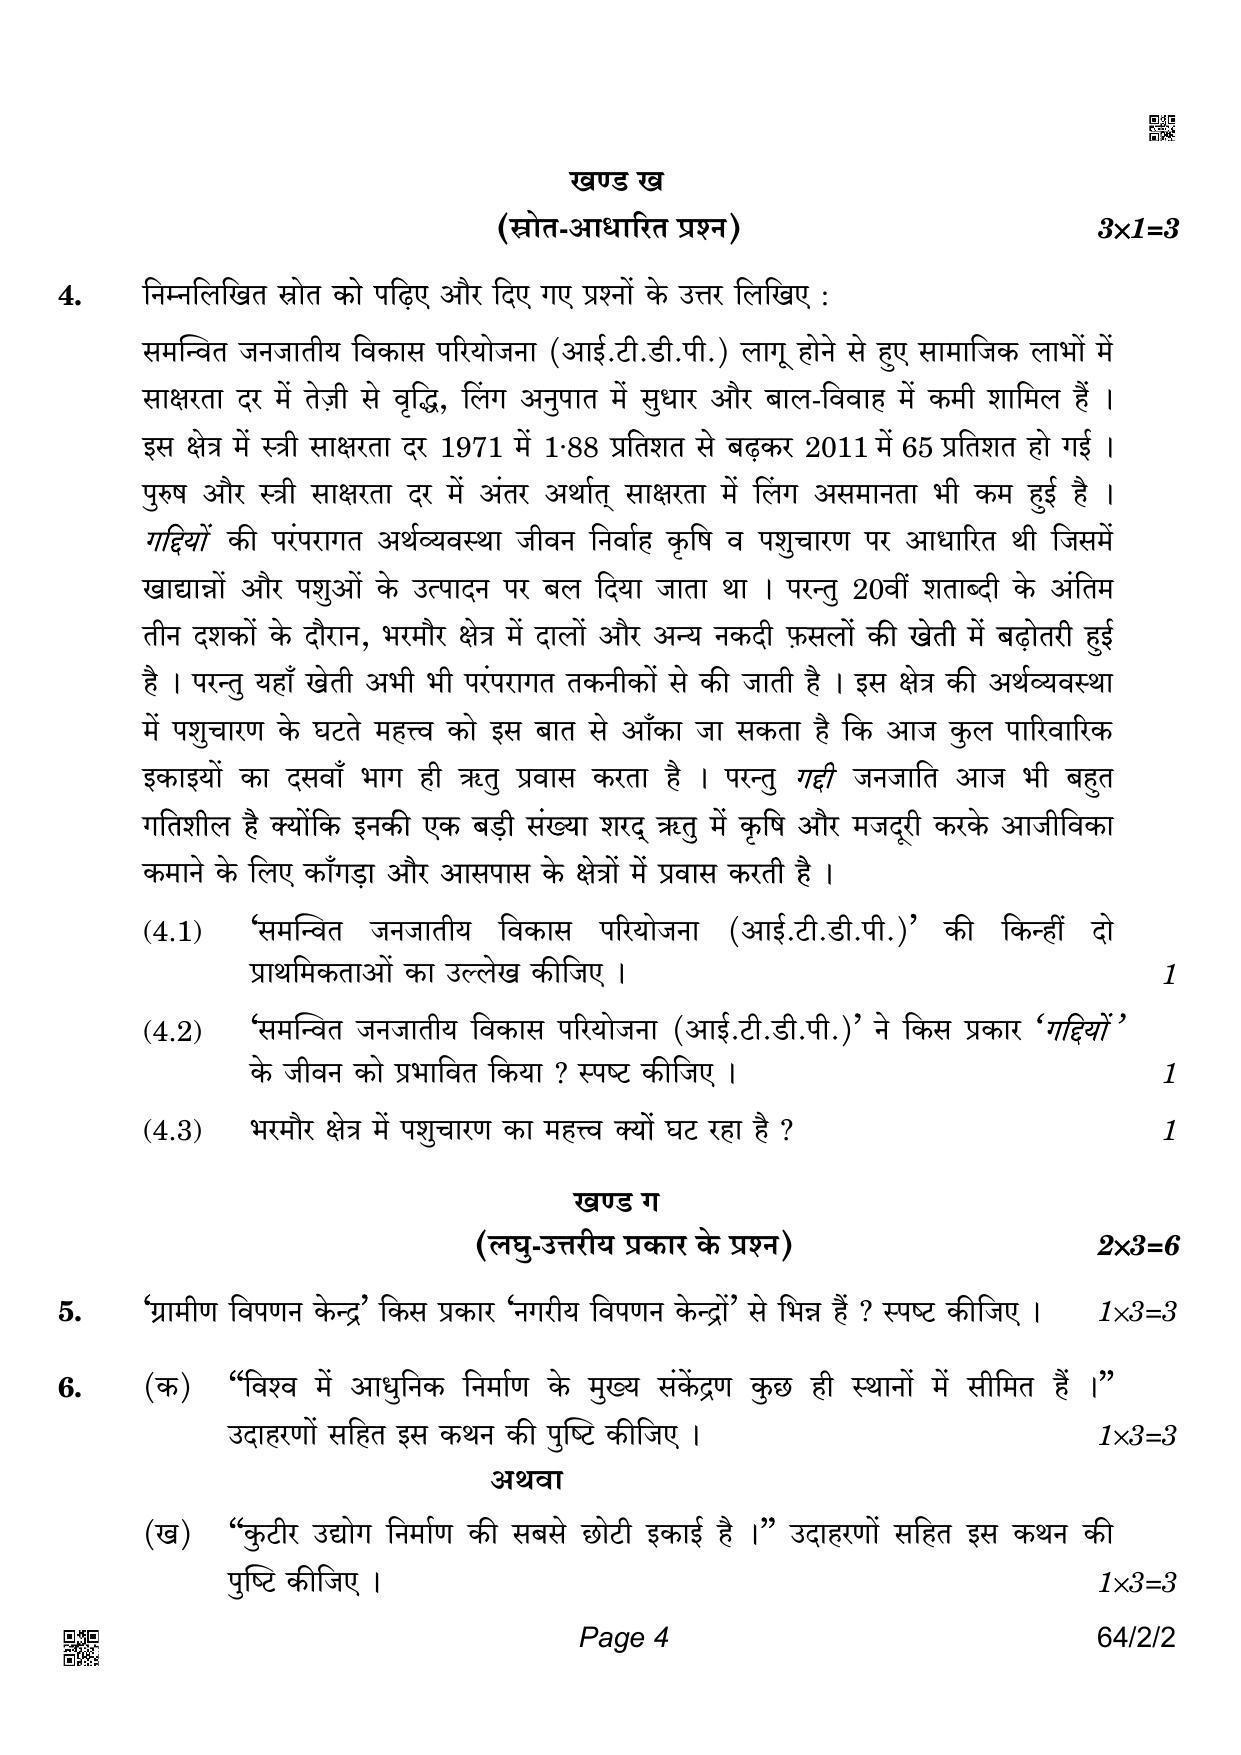 CBSE Class 12 64-2-2 Geography 2022 Question Paper - Page 4